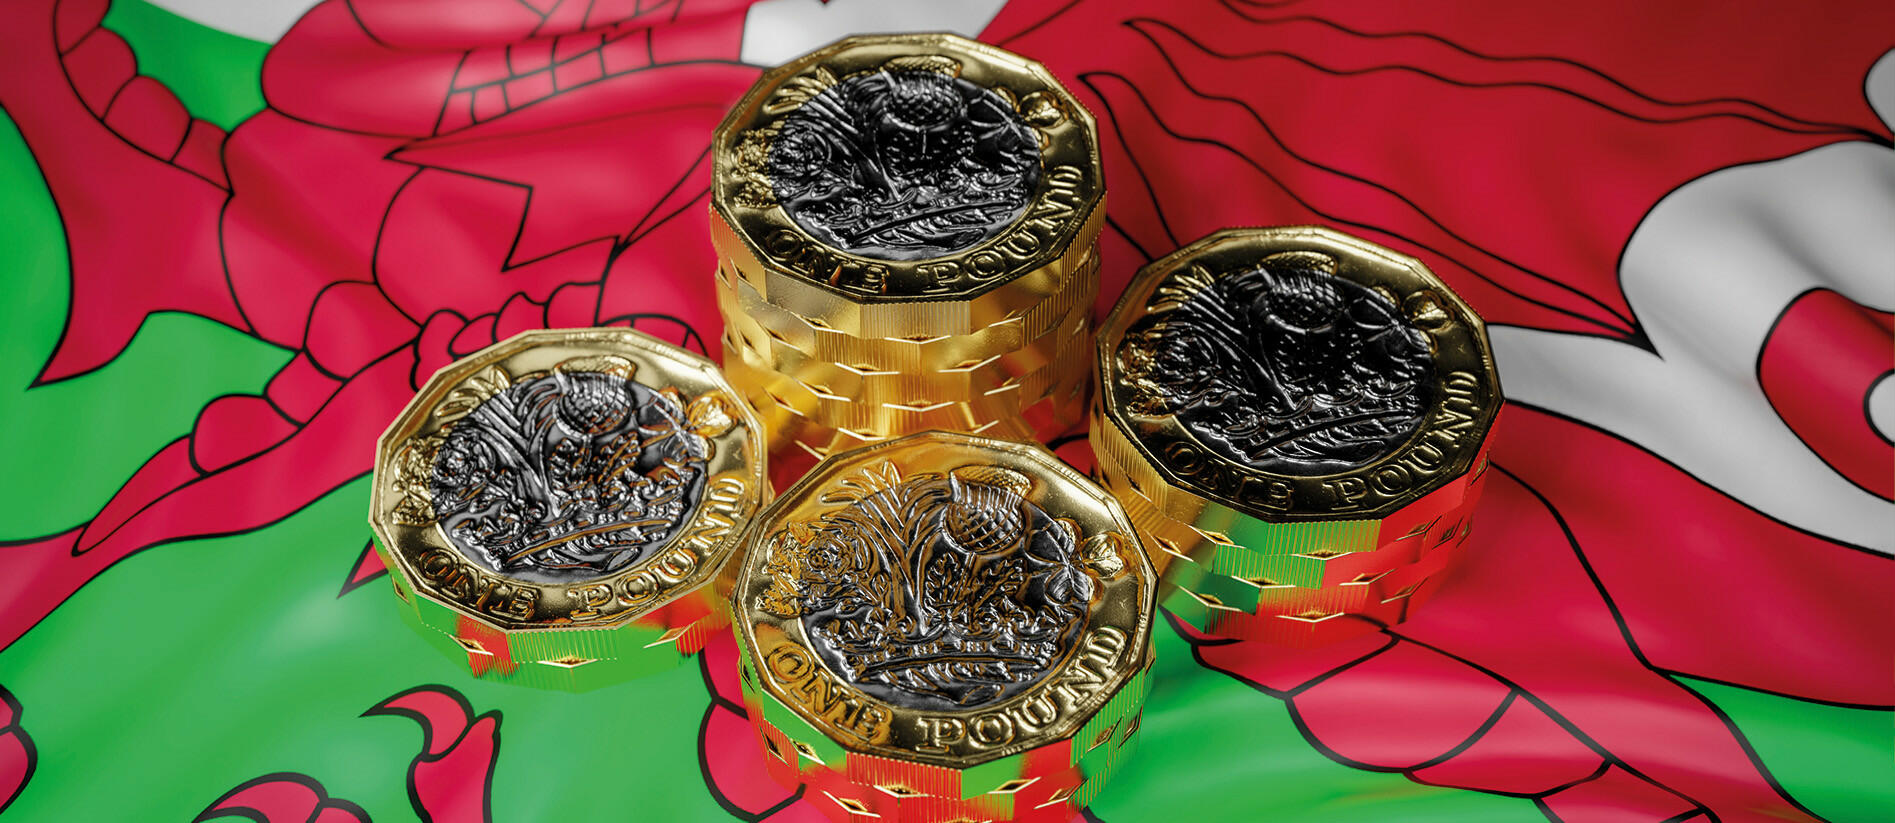 Wales and devolved tax powers: scope to do more?